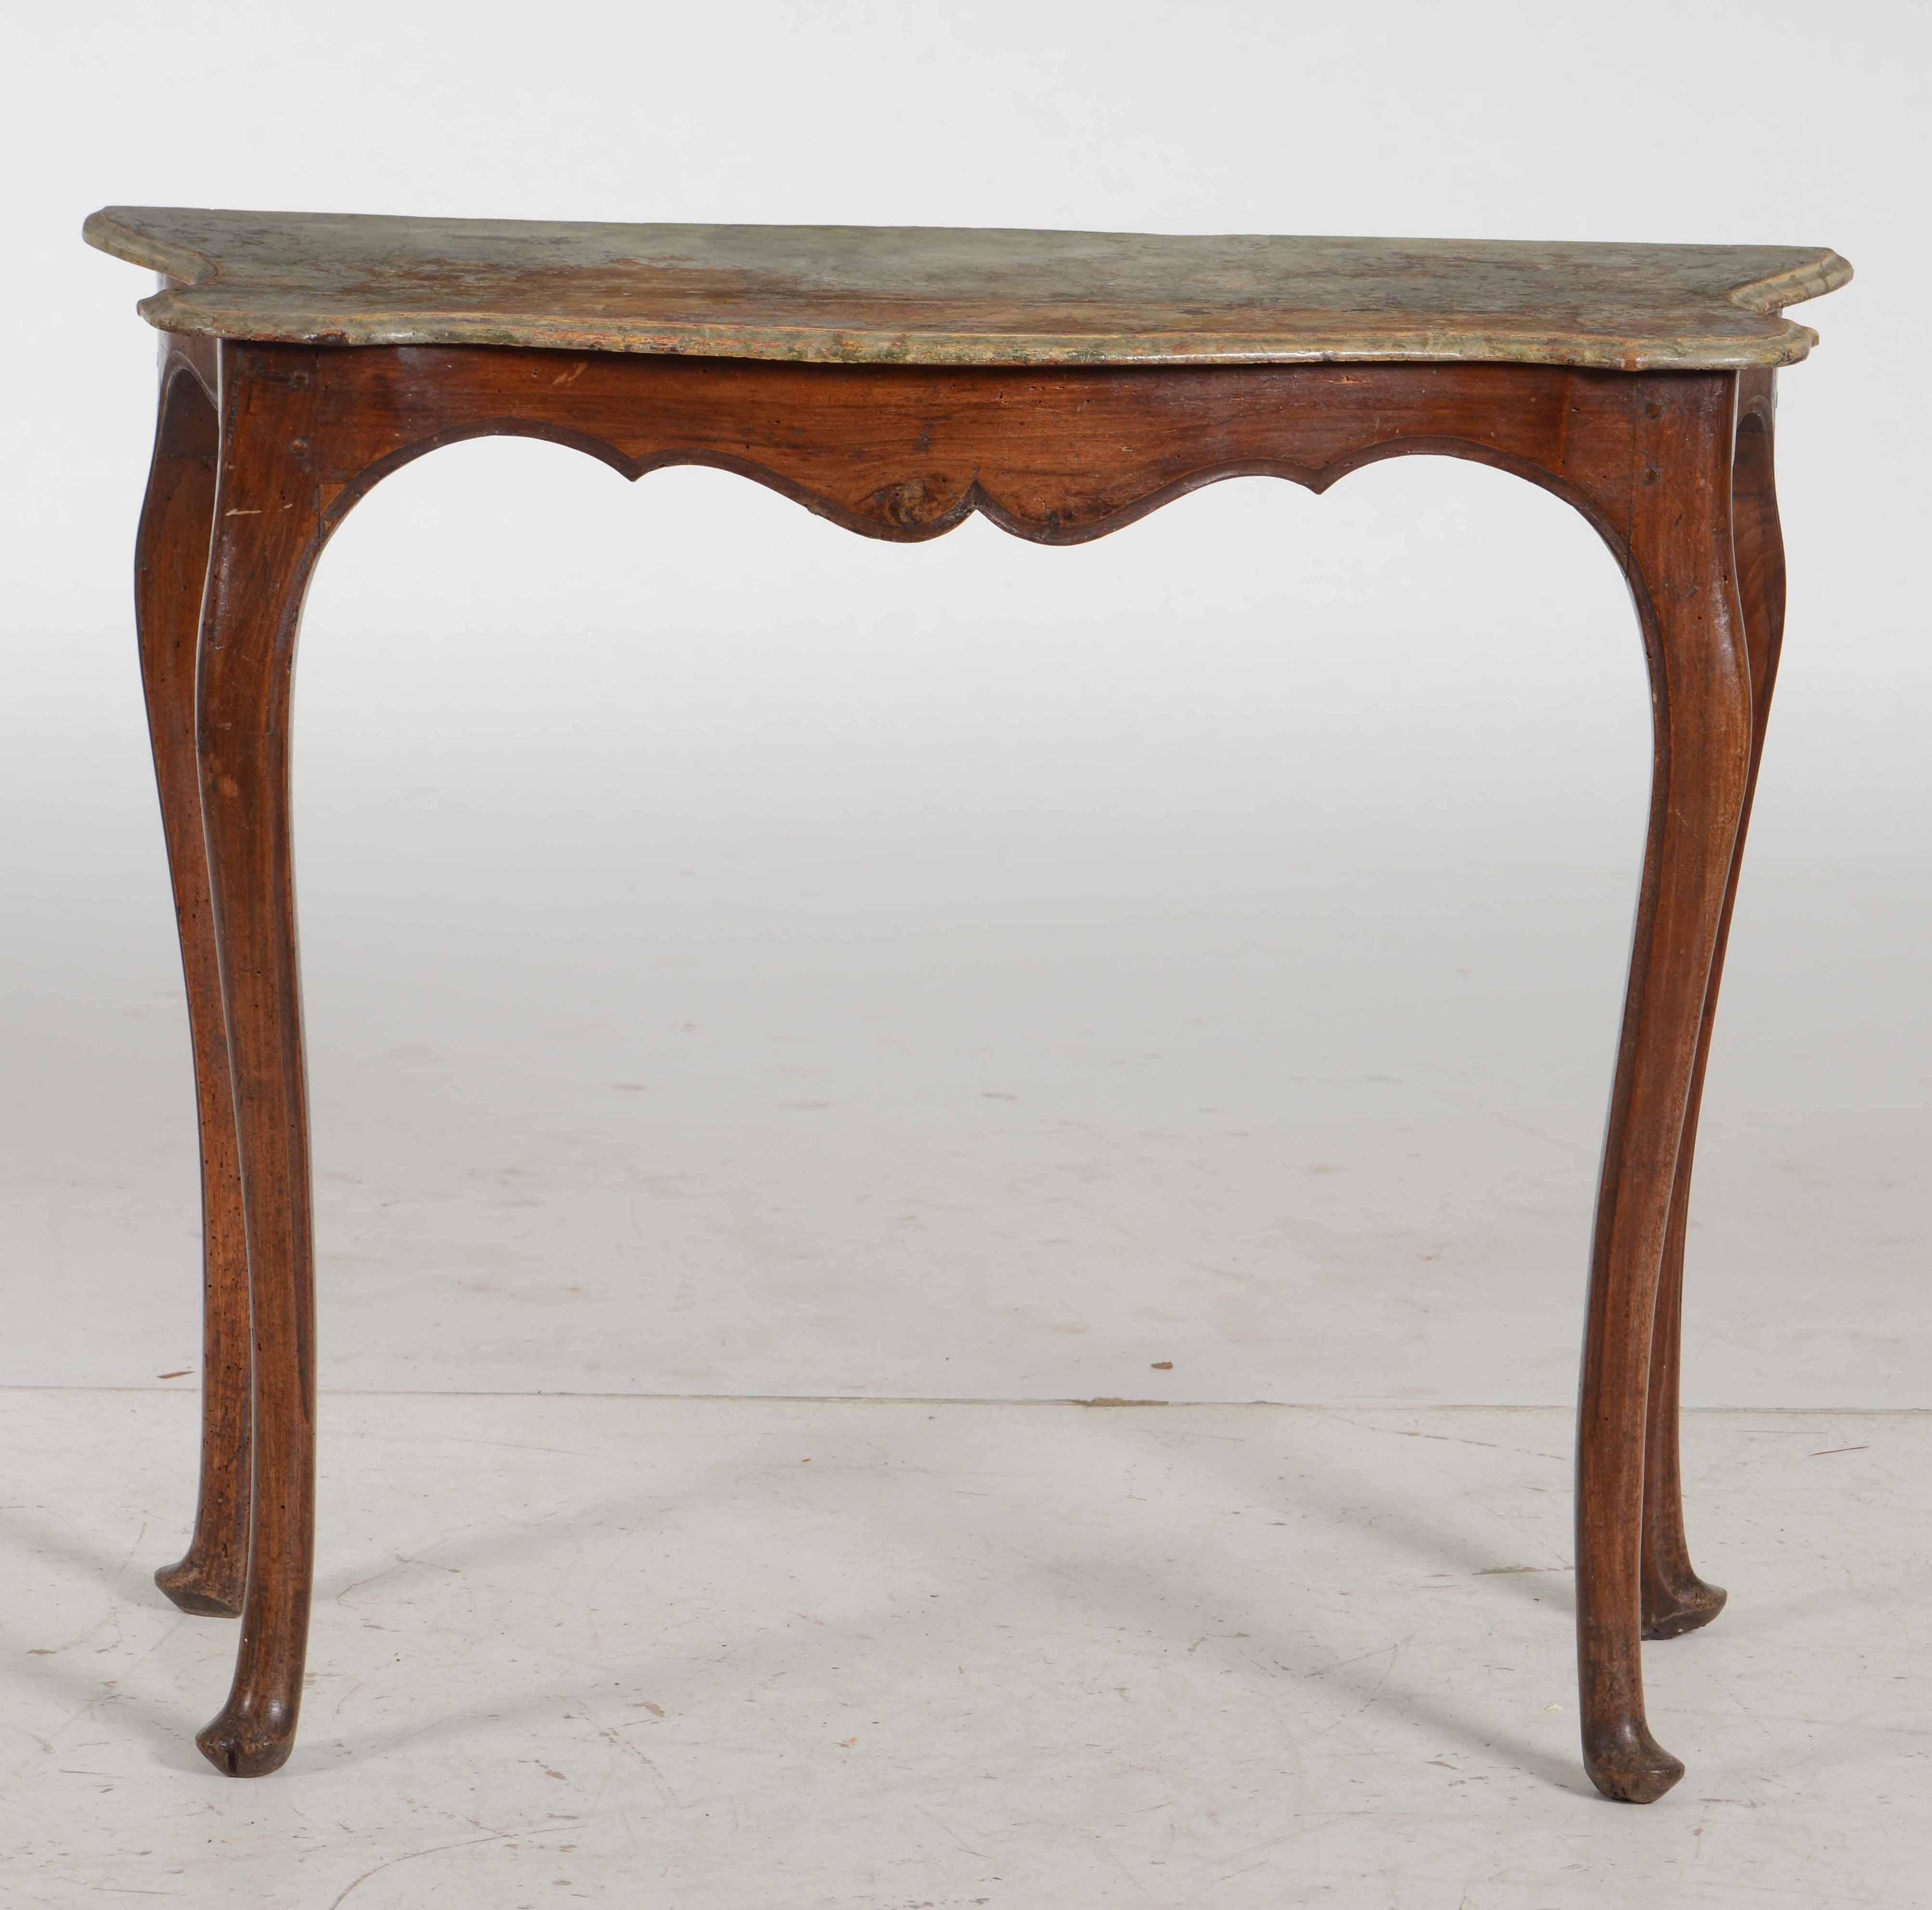 A very elegant 18th century small console table in walnut with original faux marble painted top. Beautiful soft lines, works in a traditional or contemporary setting.